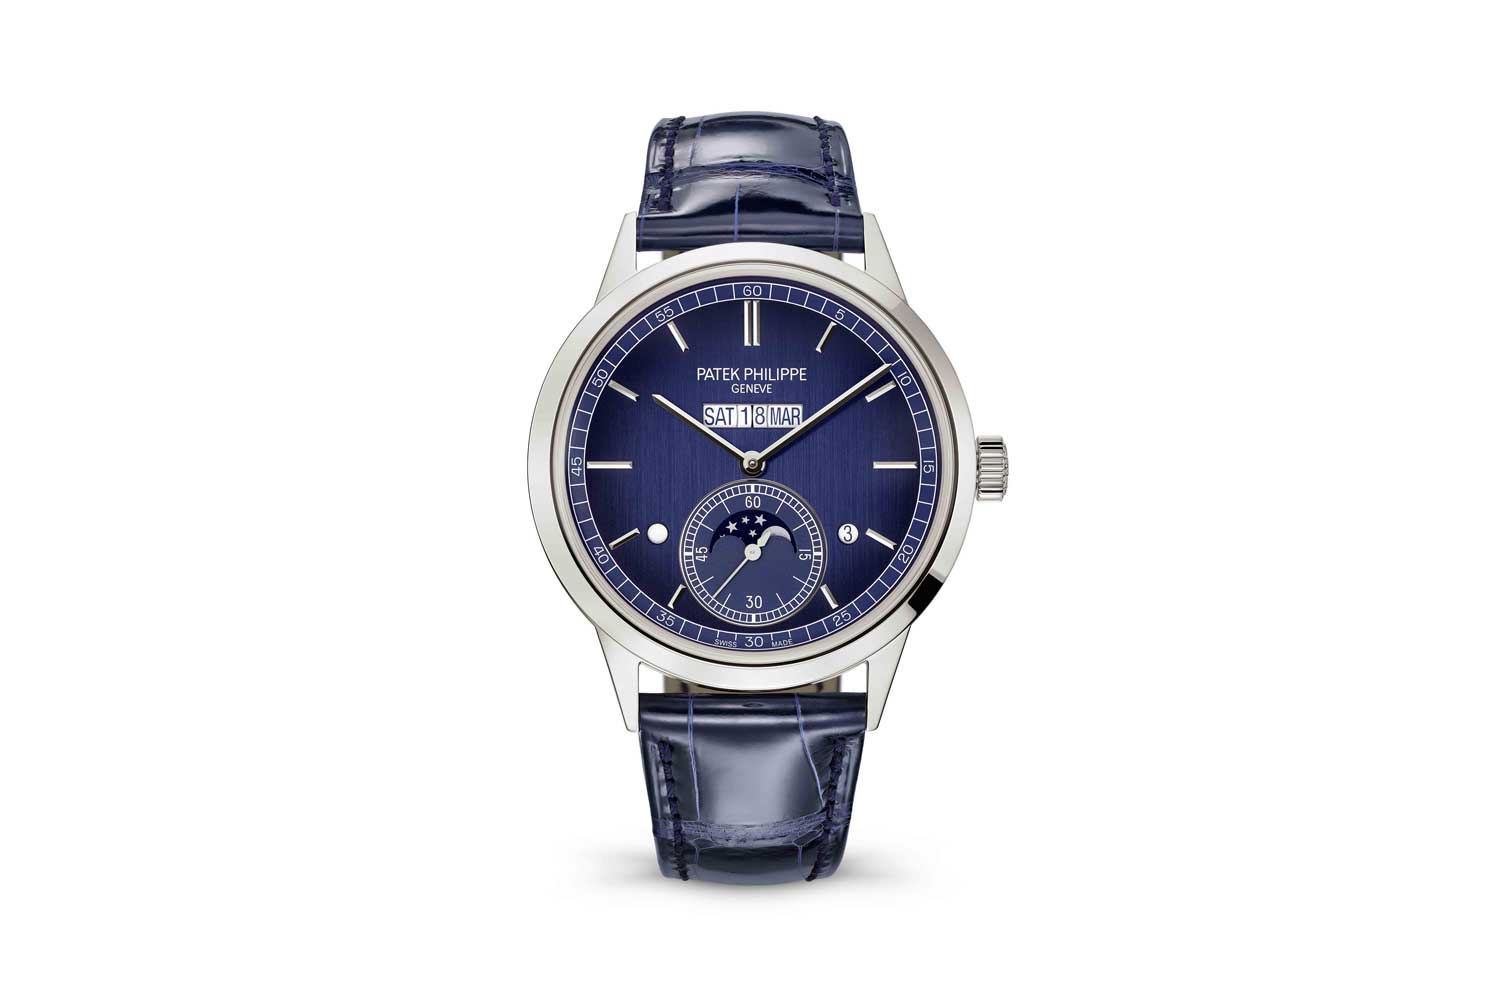 Patek Philippe closes off Watches & Wonders 2021 with an all new perpetual calendar, the Ref. 5236P-001 In-line Perpetual Calendar with a new patented calendar display